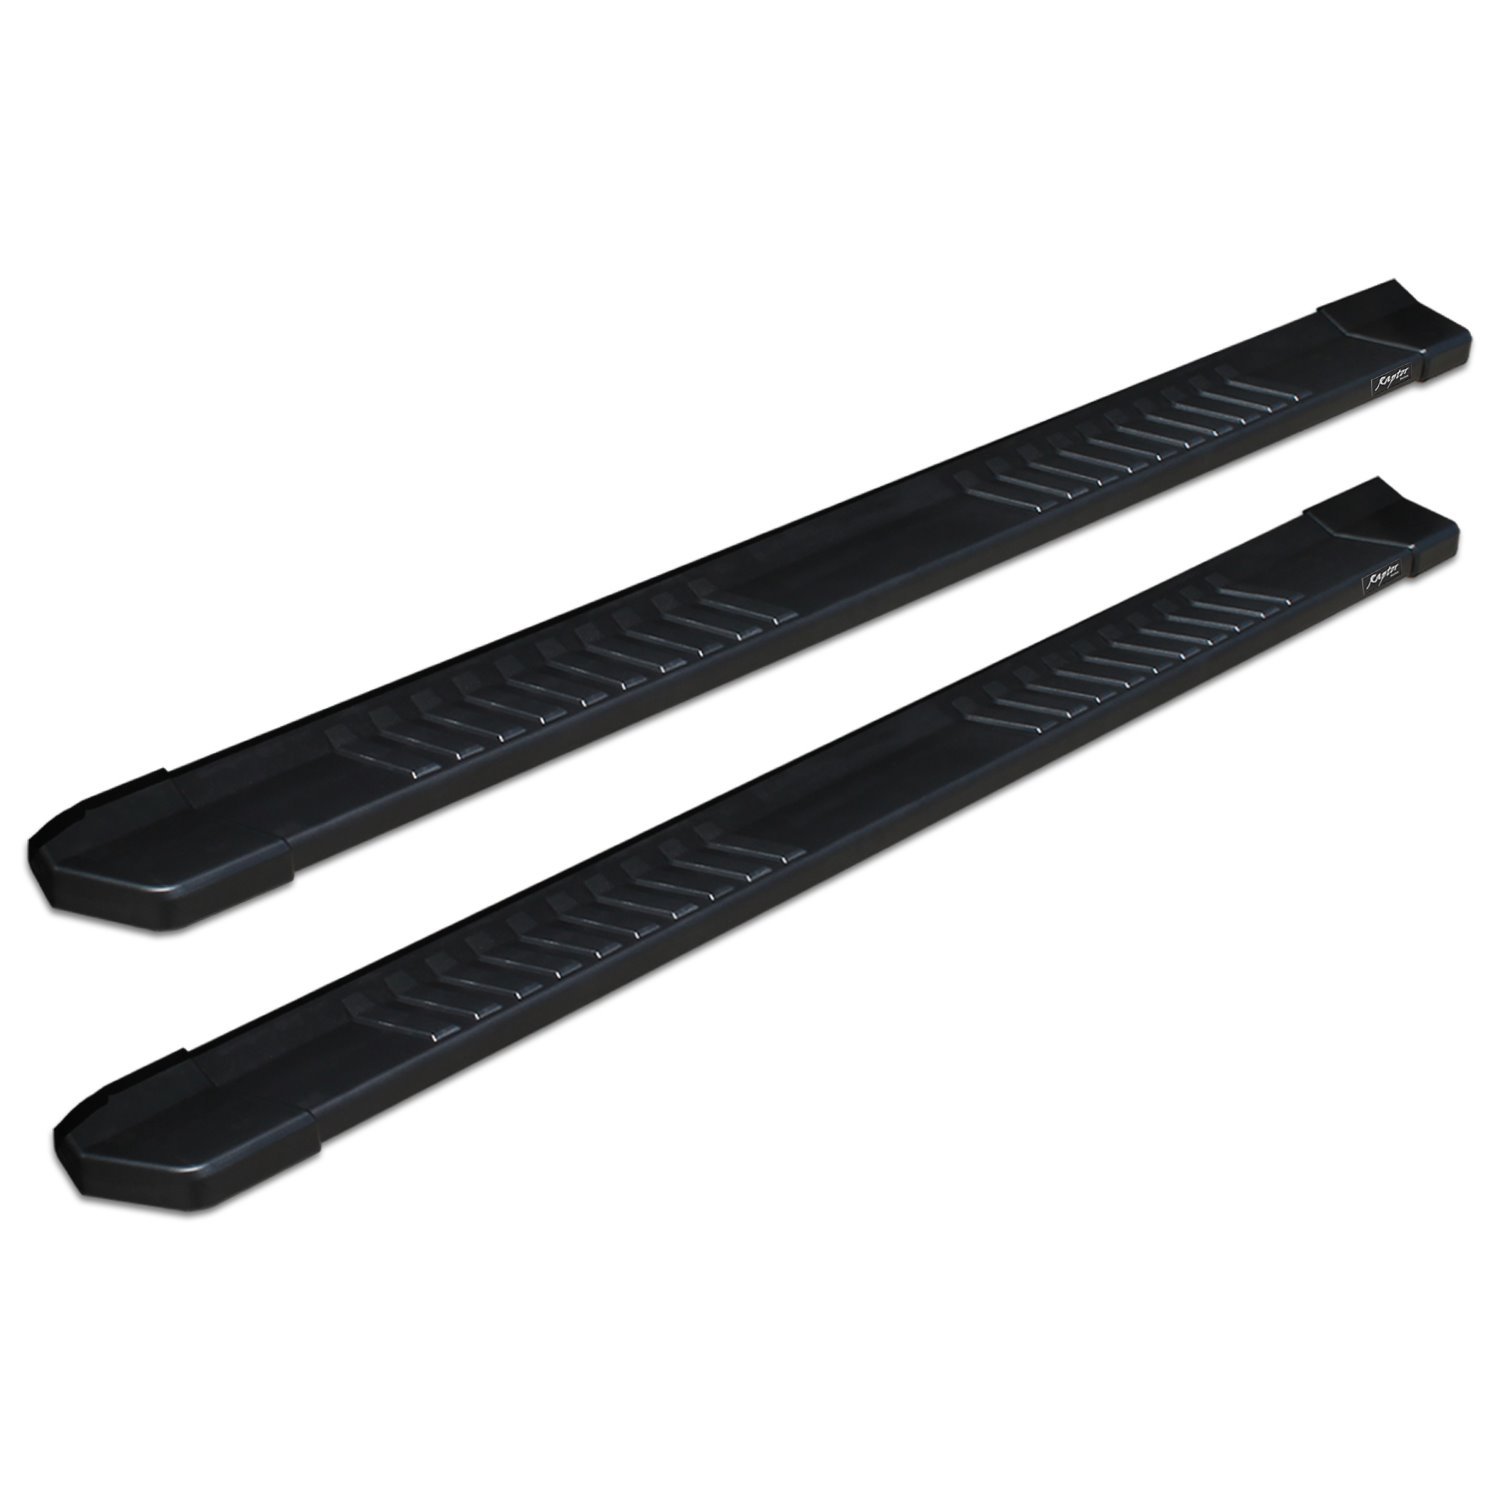 1702-0501BT 6 in OEM Style Slide Track Running Boards, Black Aluminum, Fits Select Dodge Ram 1500 New Body Style